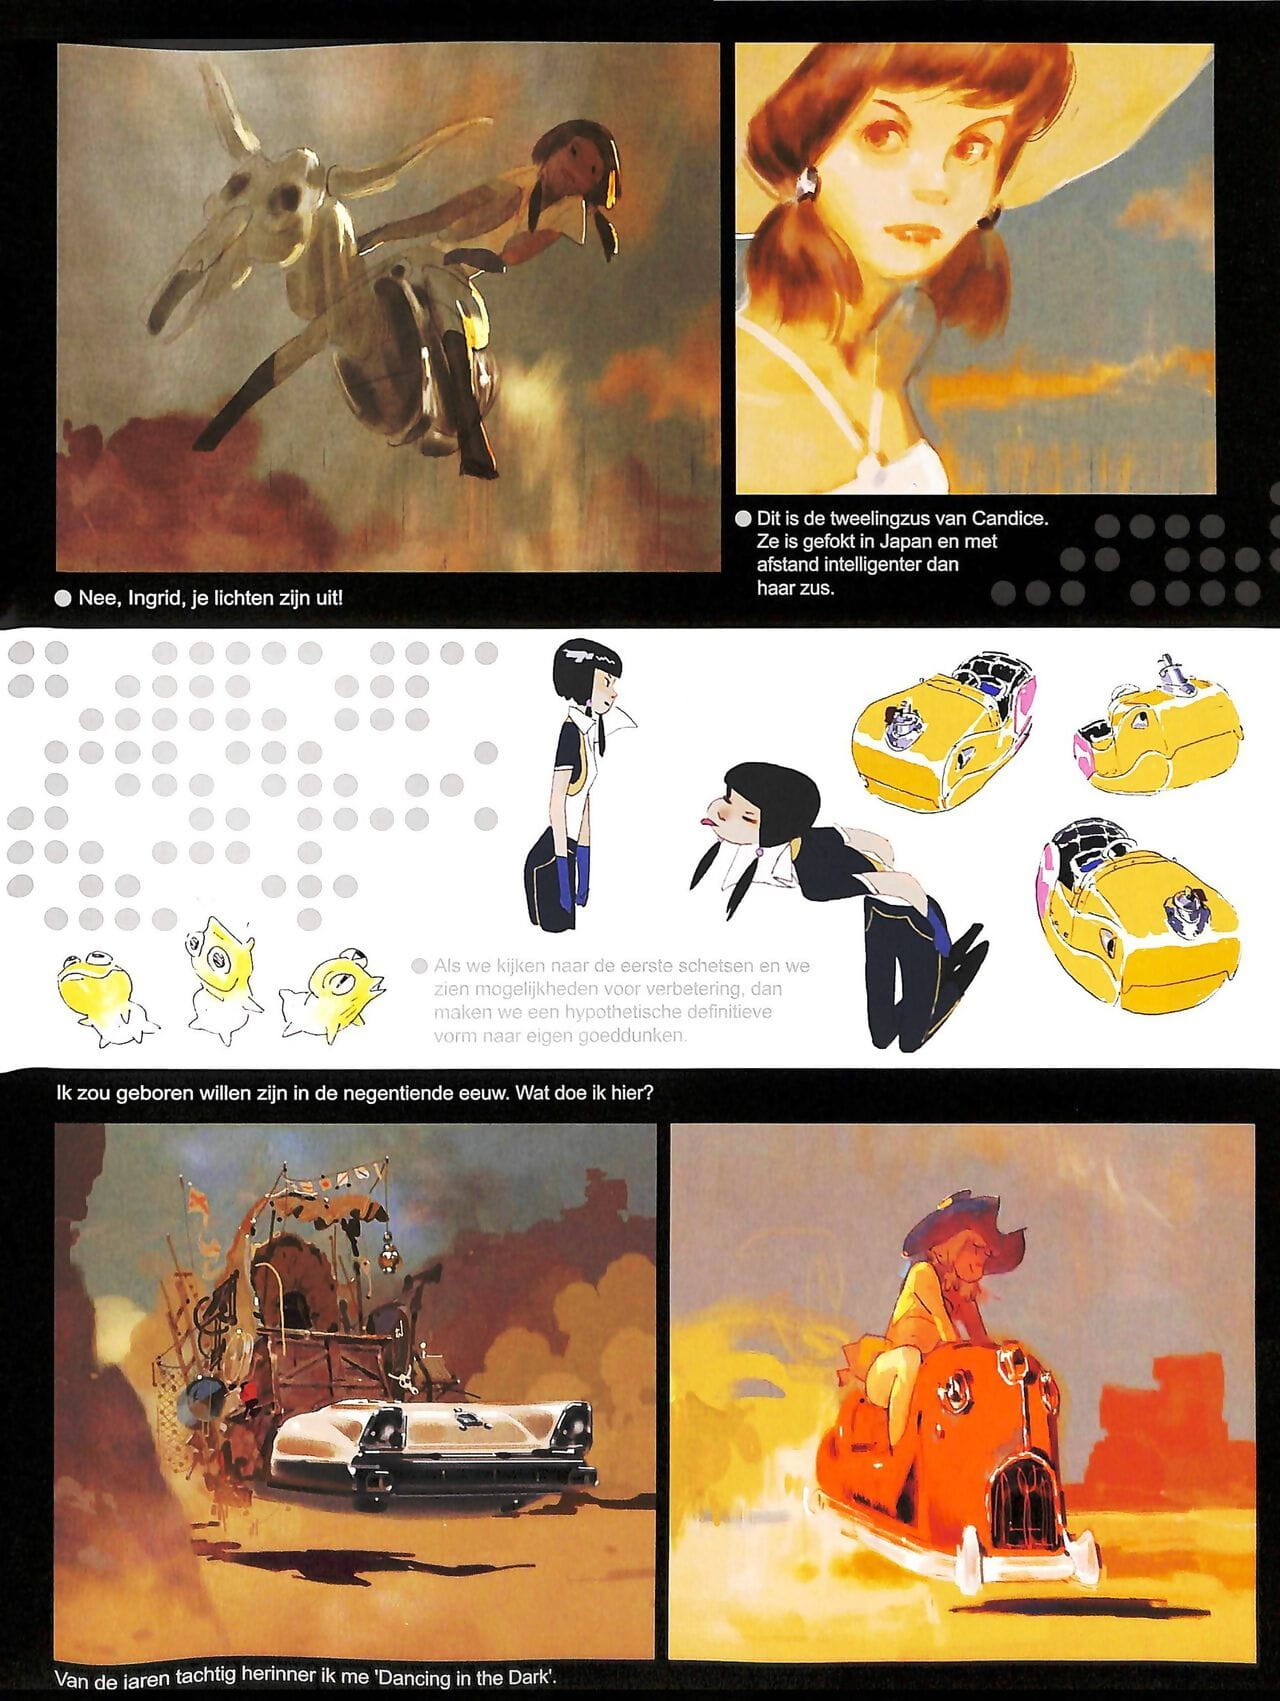 Sky-Doll - A01 - Spaceship Collection Boek - part 4